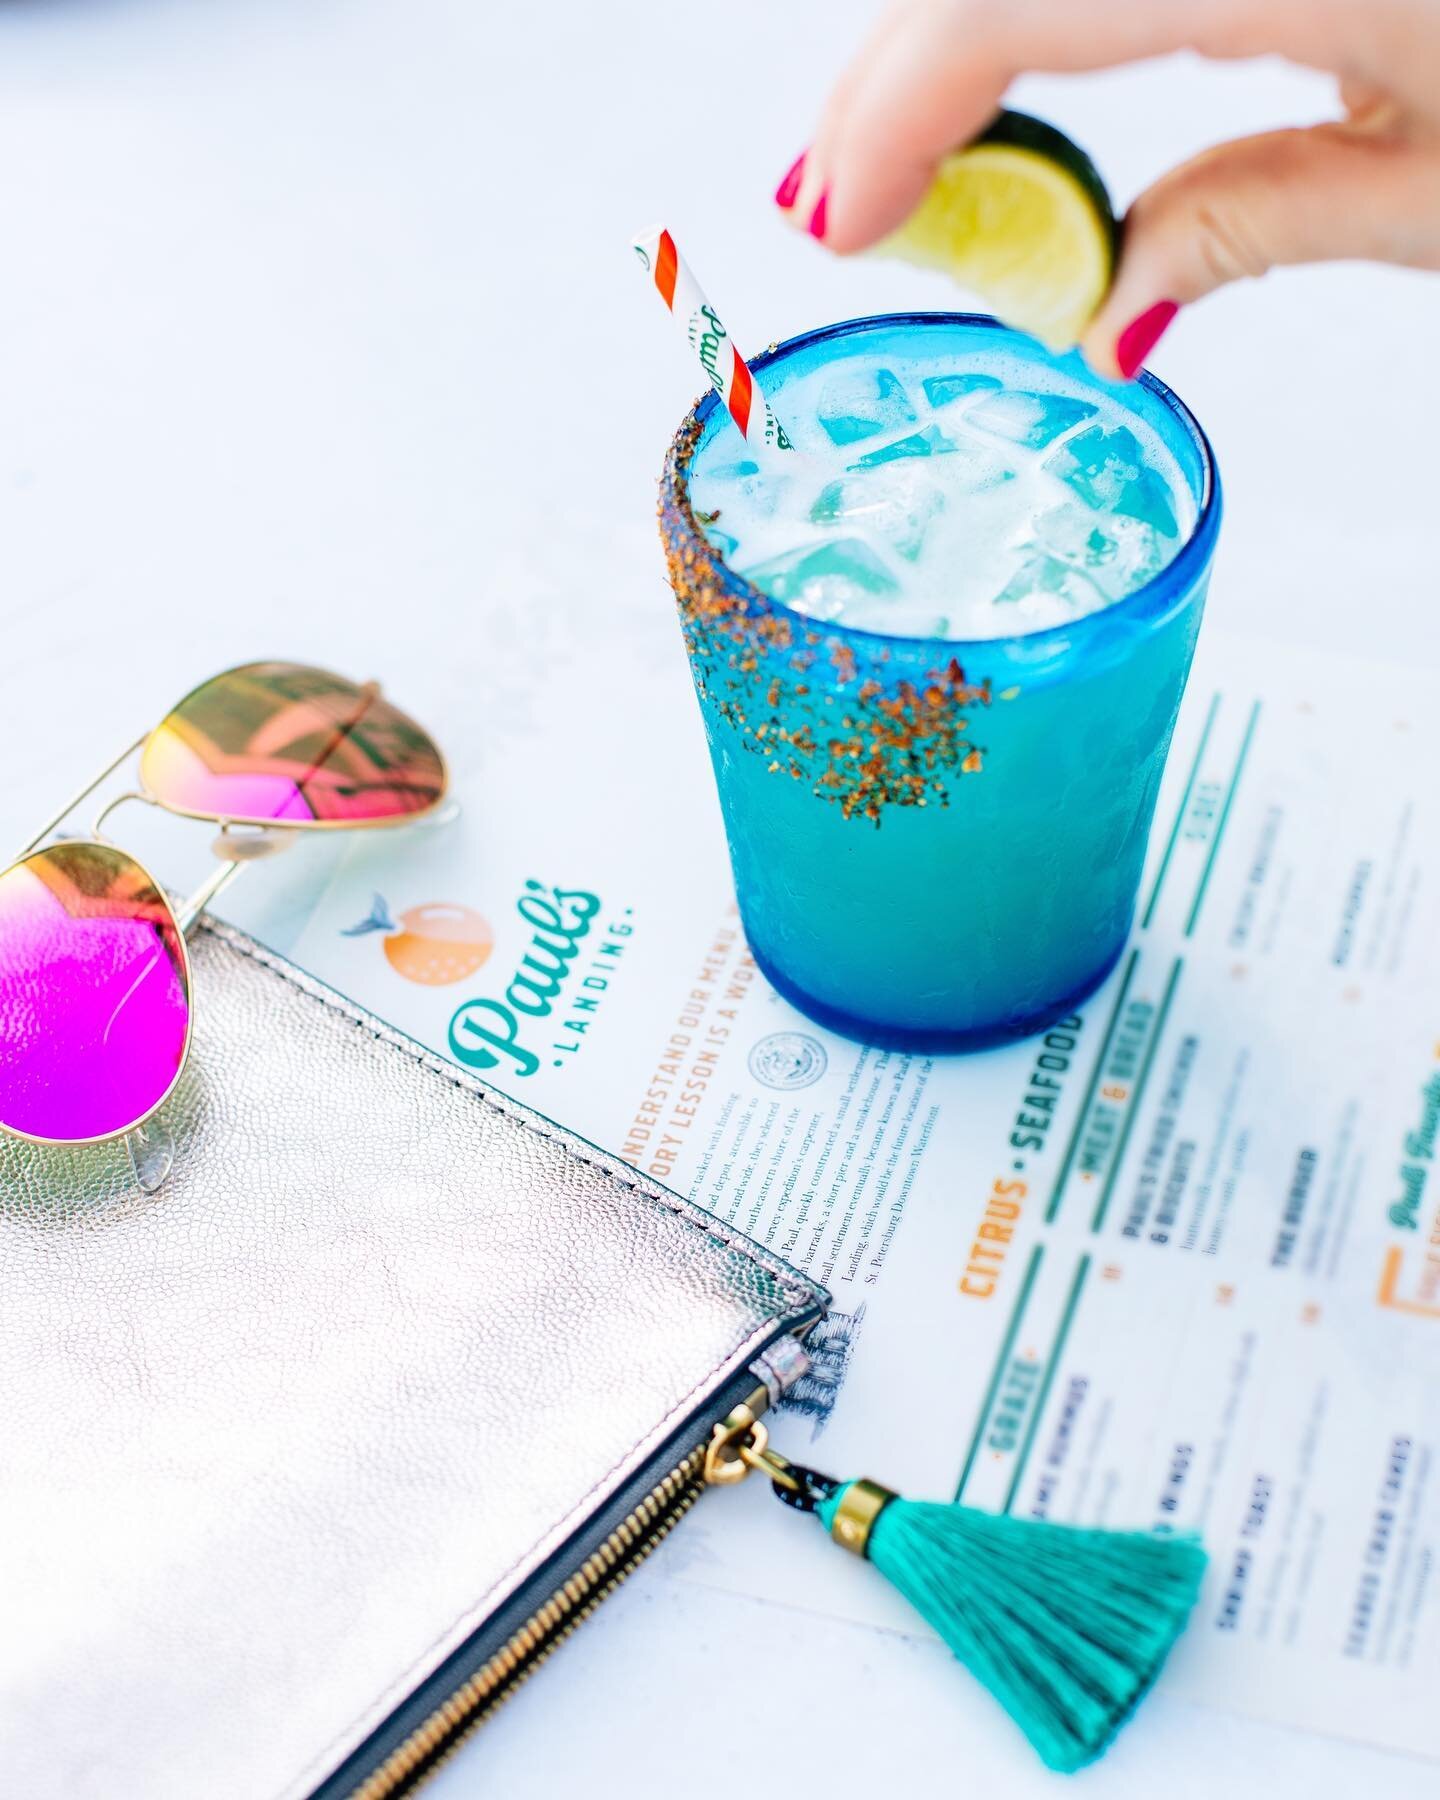 Sunshine in every sip.